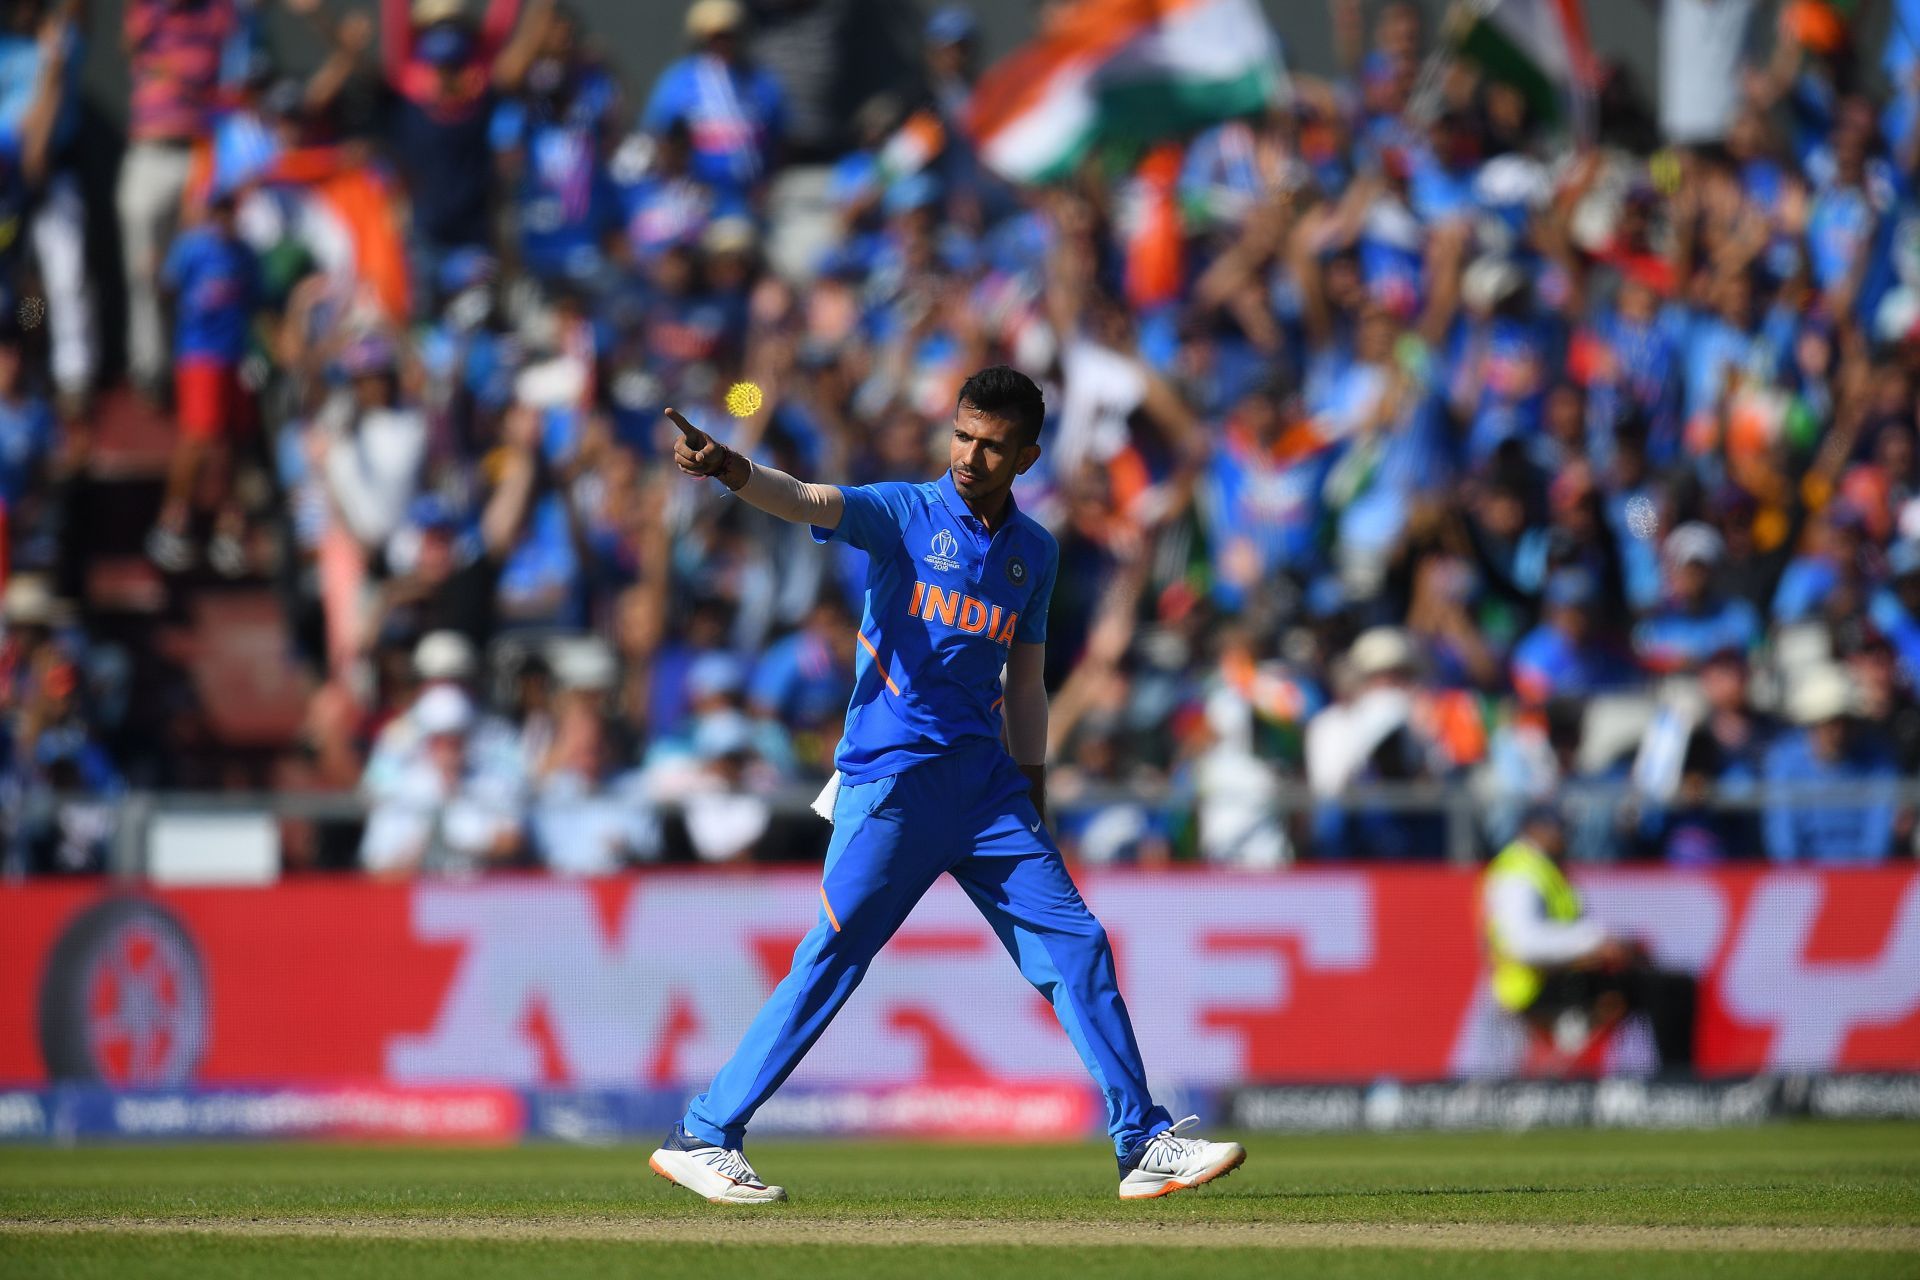 Yuzvendra Chahal was a top performer in ICC Cricket World Cup 2019